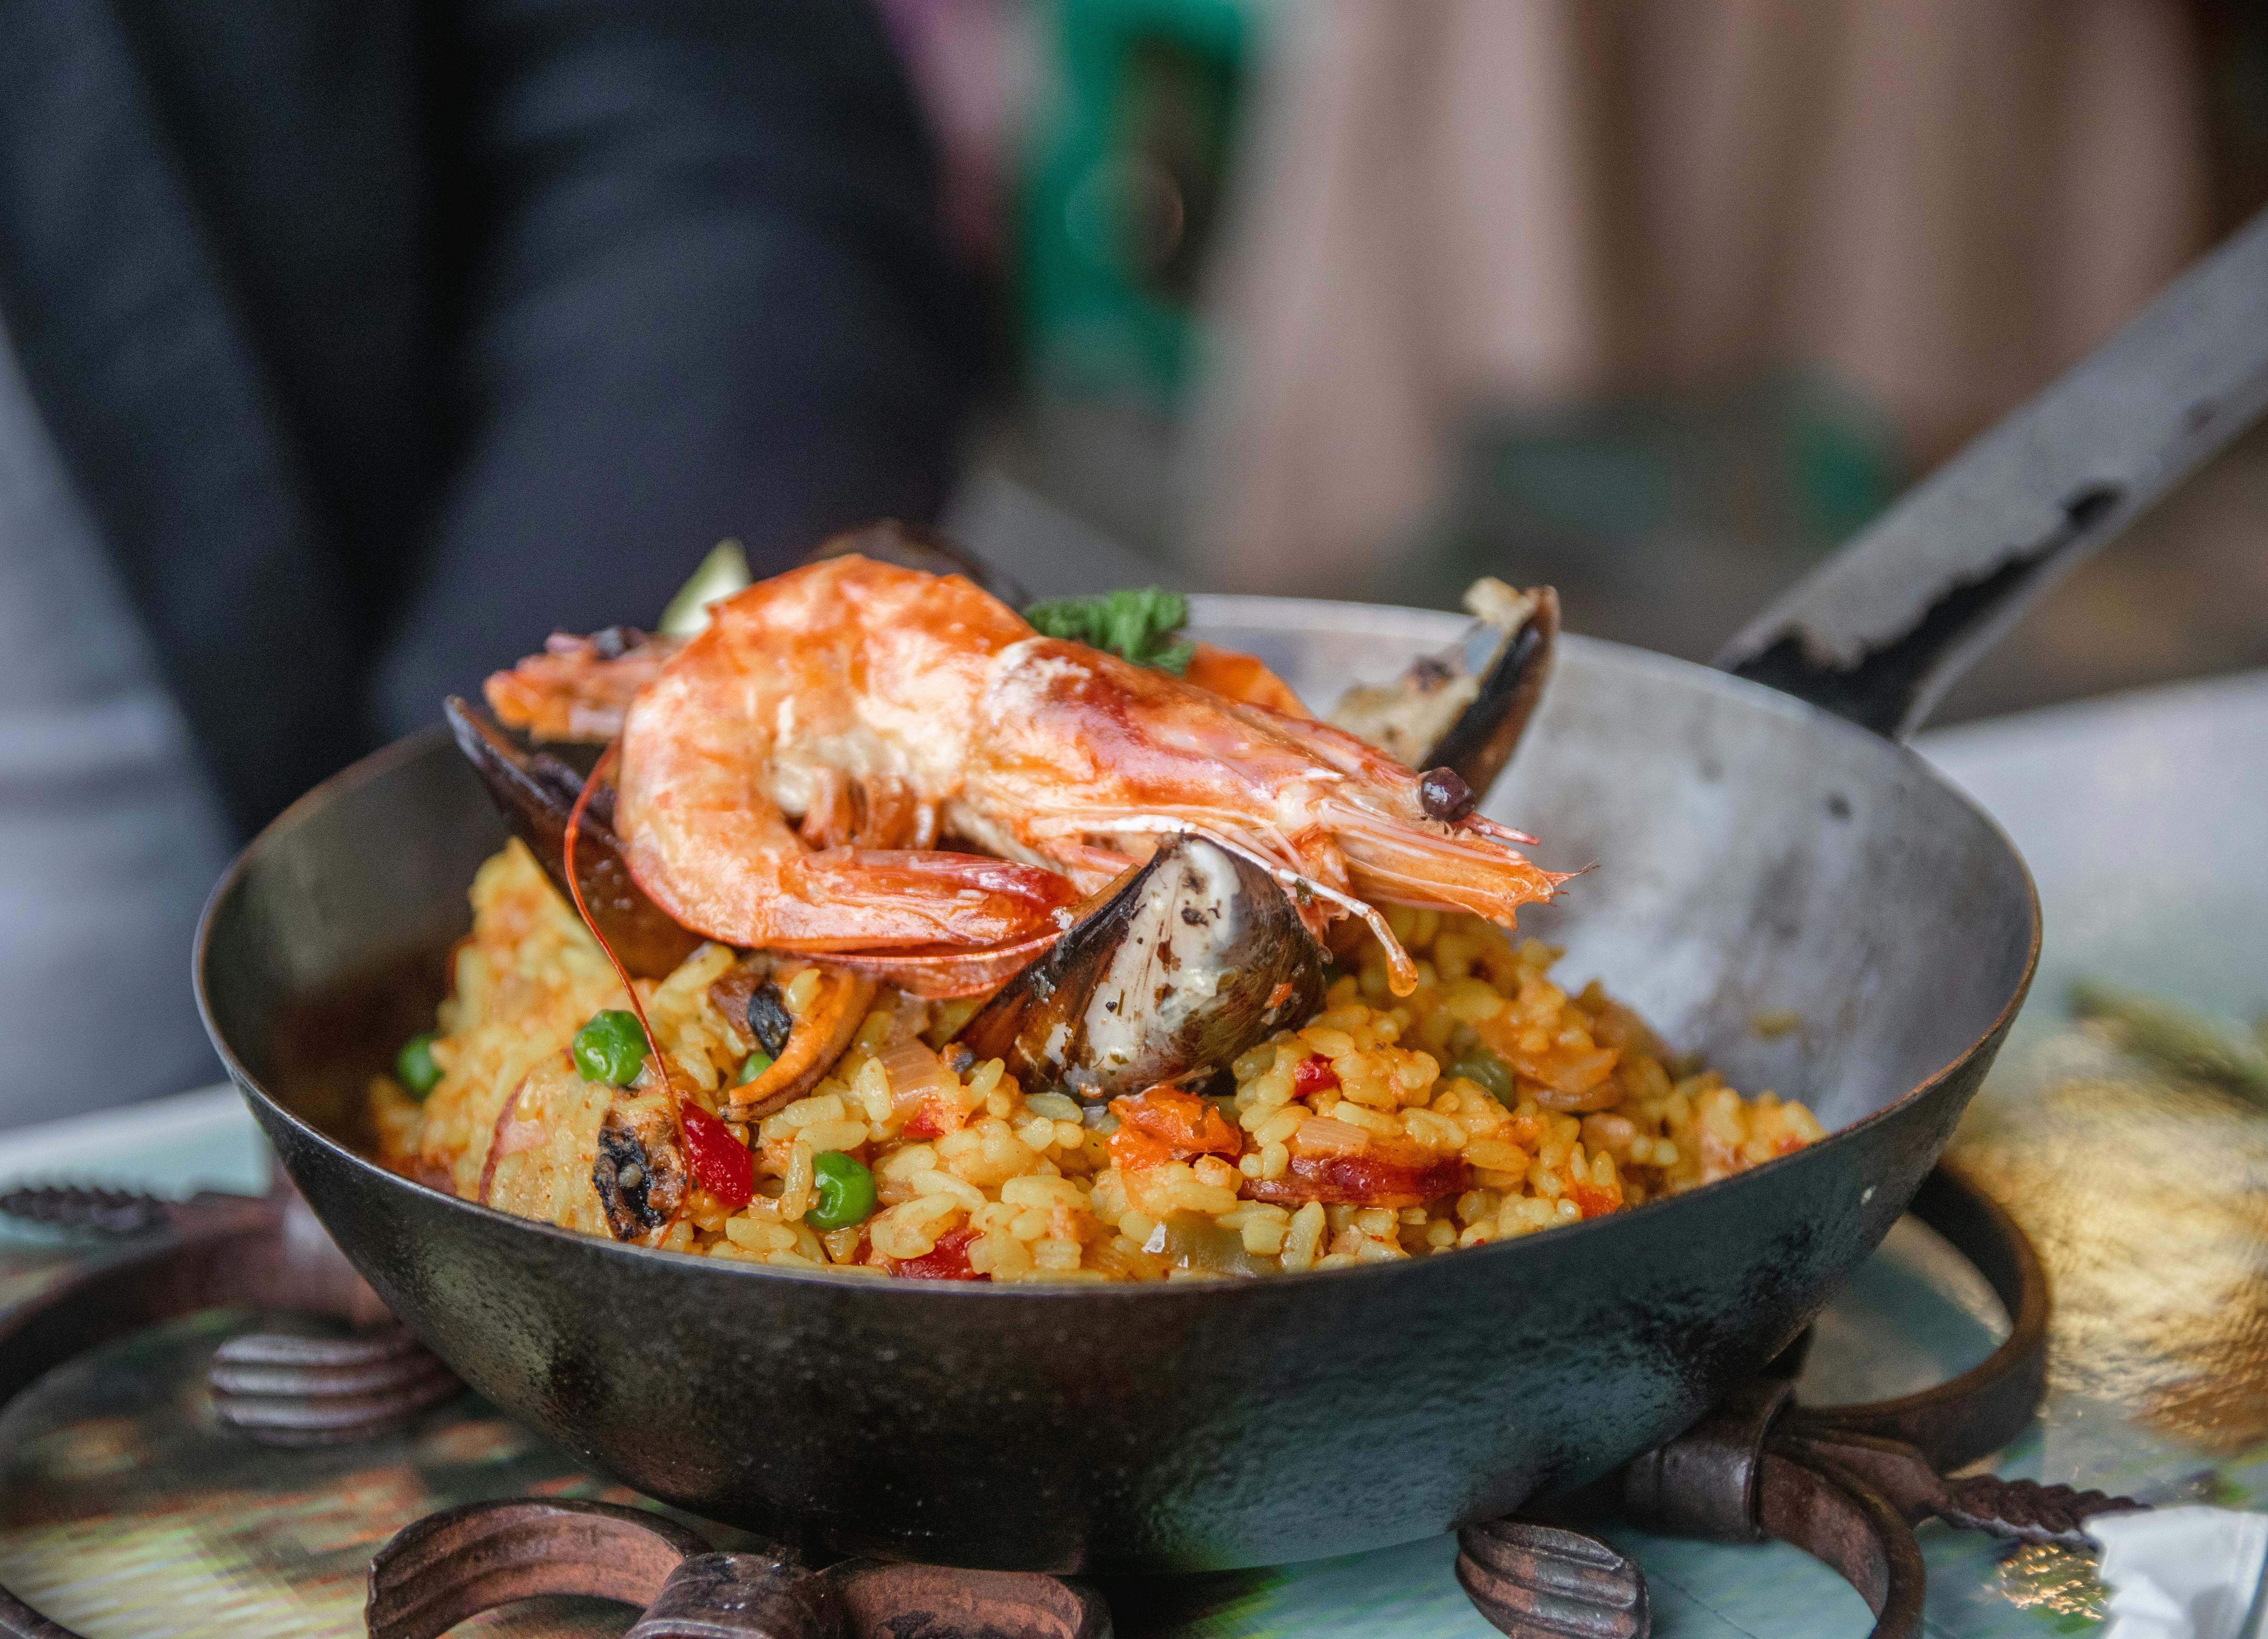 A paella is presented to diners in a cast iron pan